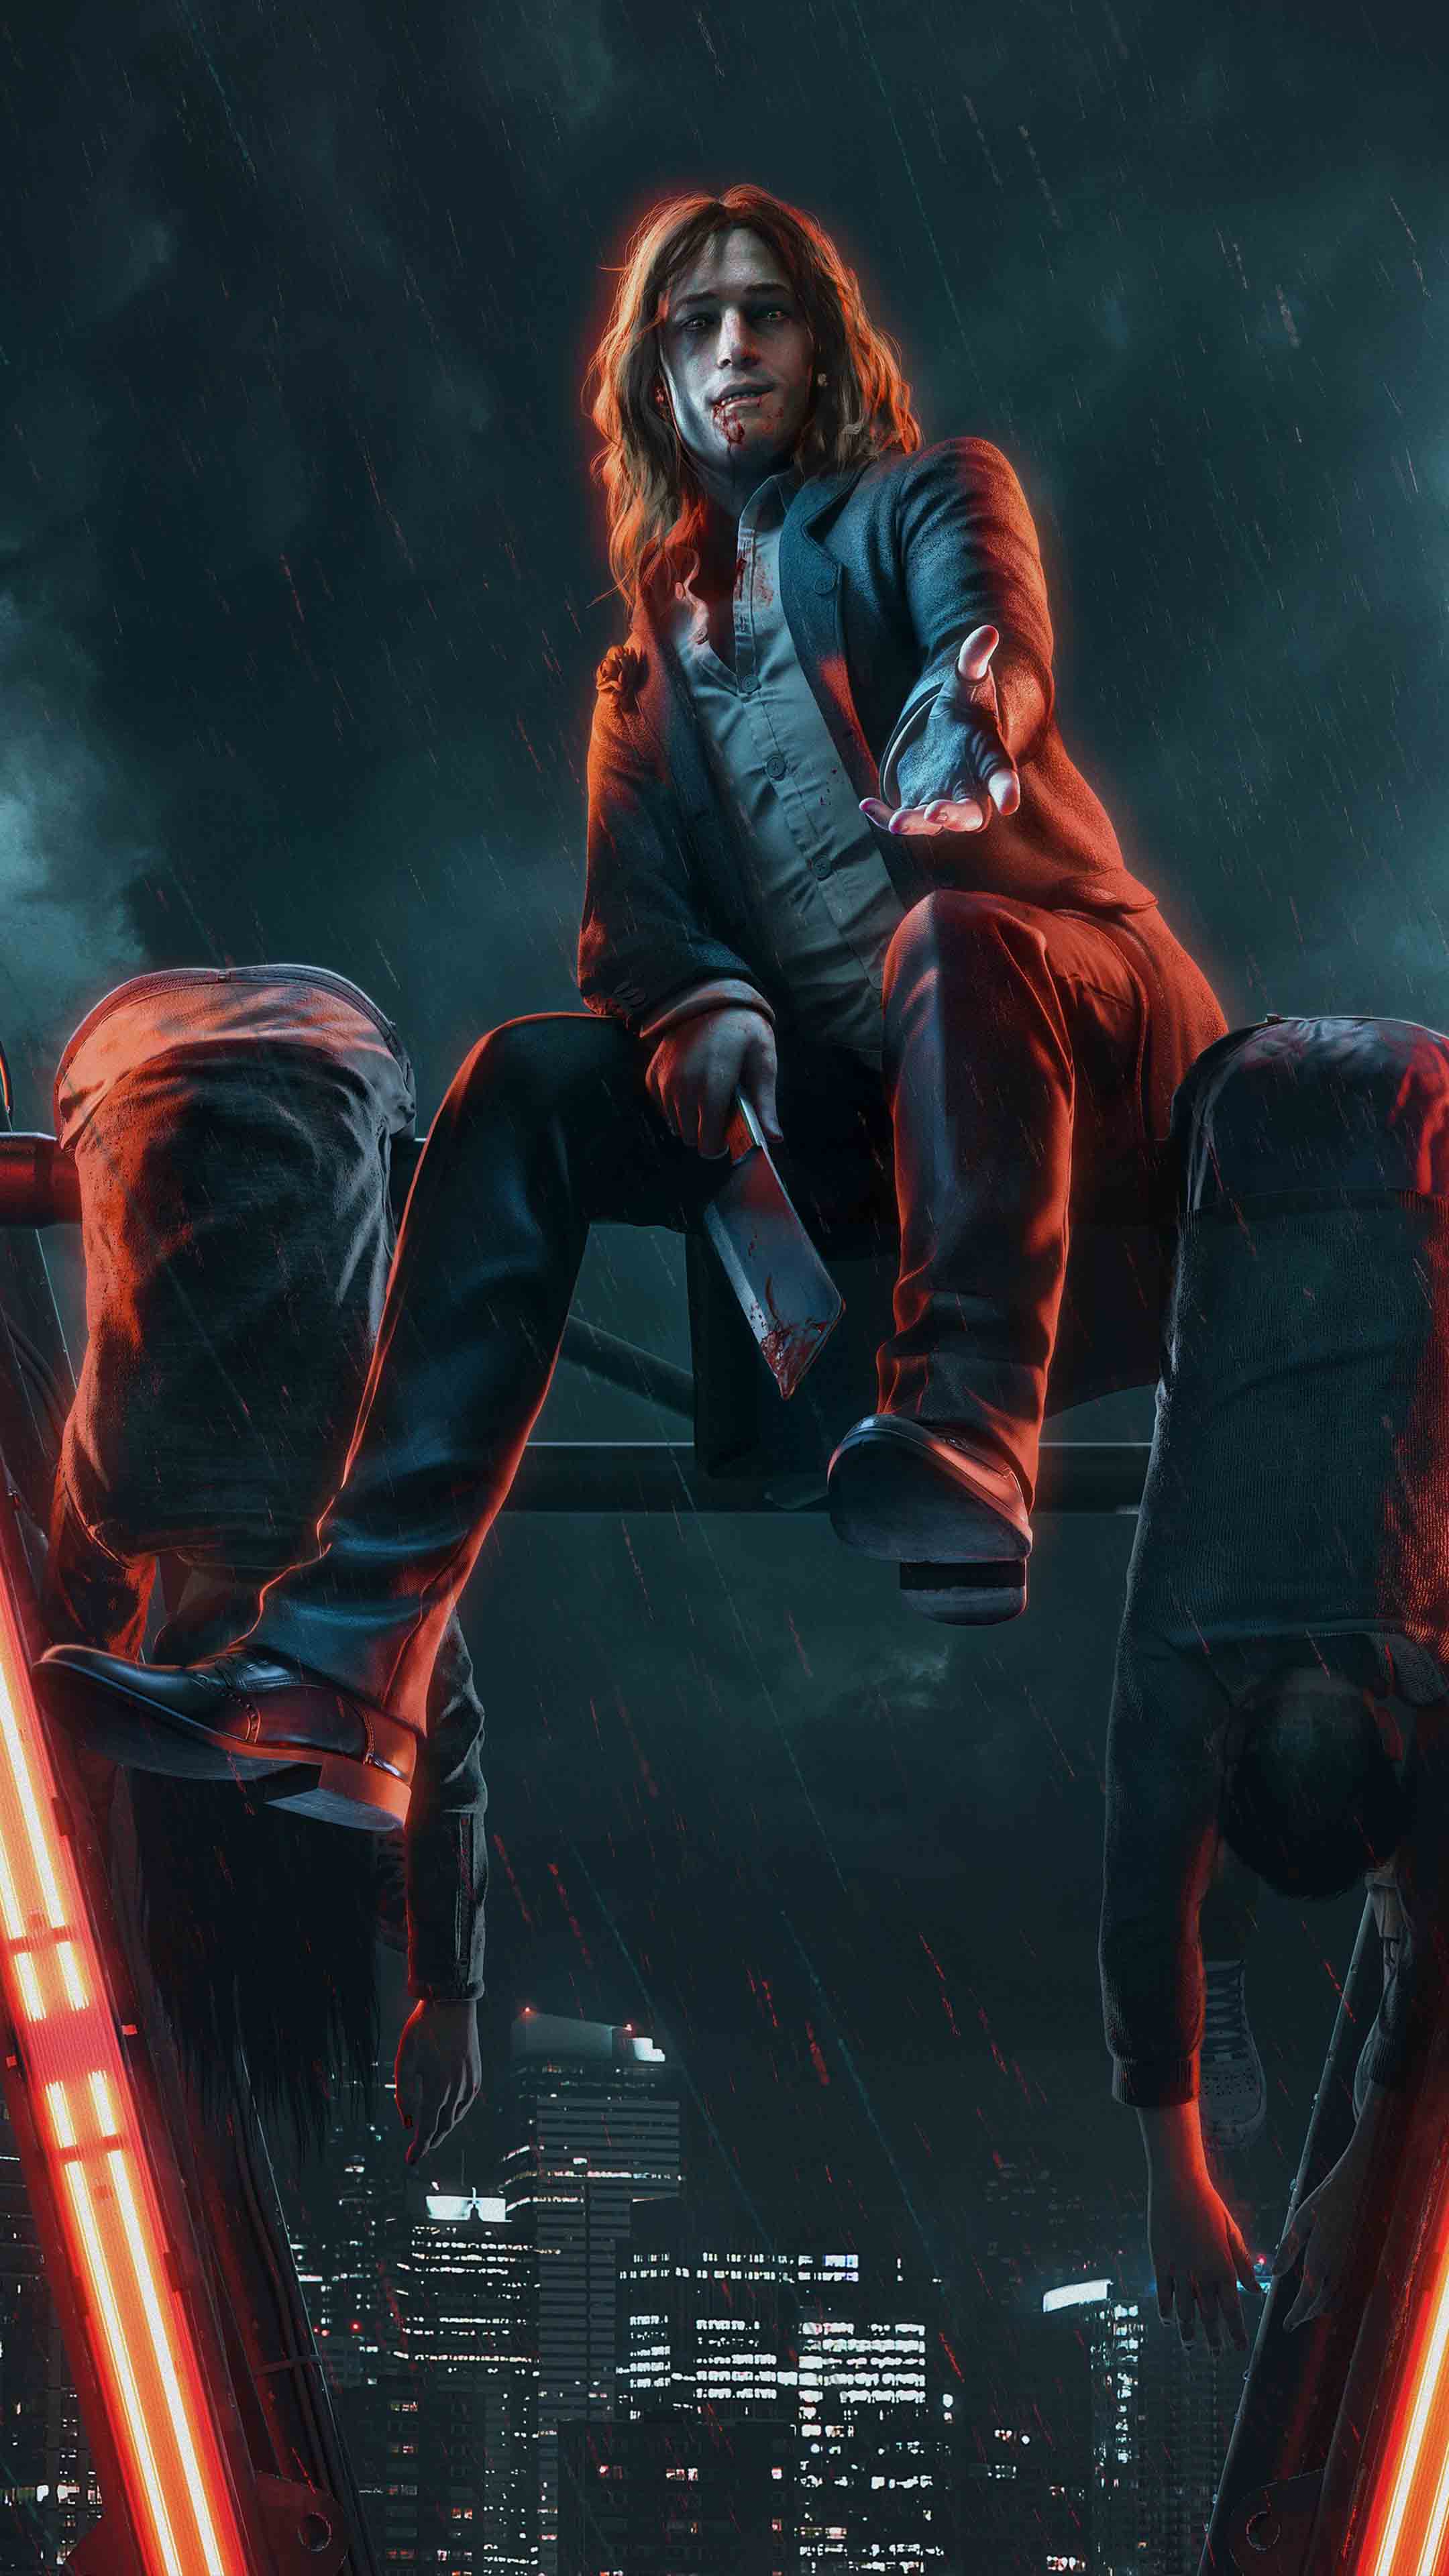 Vampire The Masquerade Bloodlines 2 4K Ultra HD Mobile Wallpaper